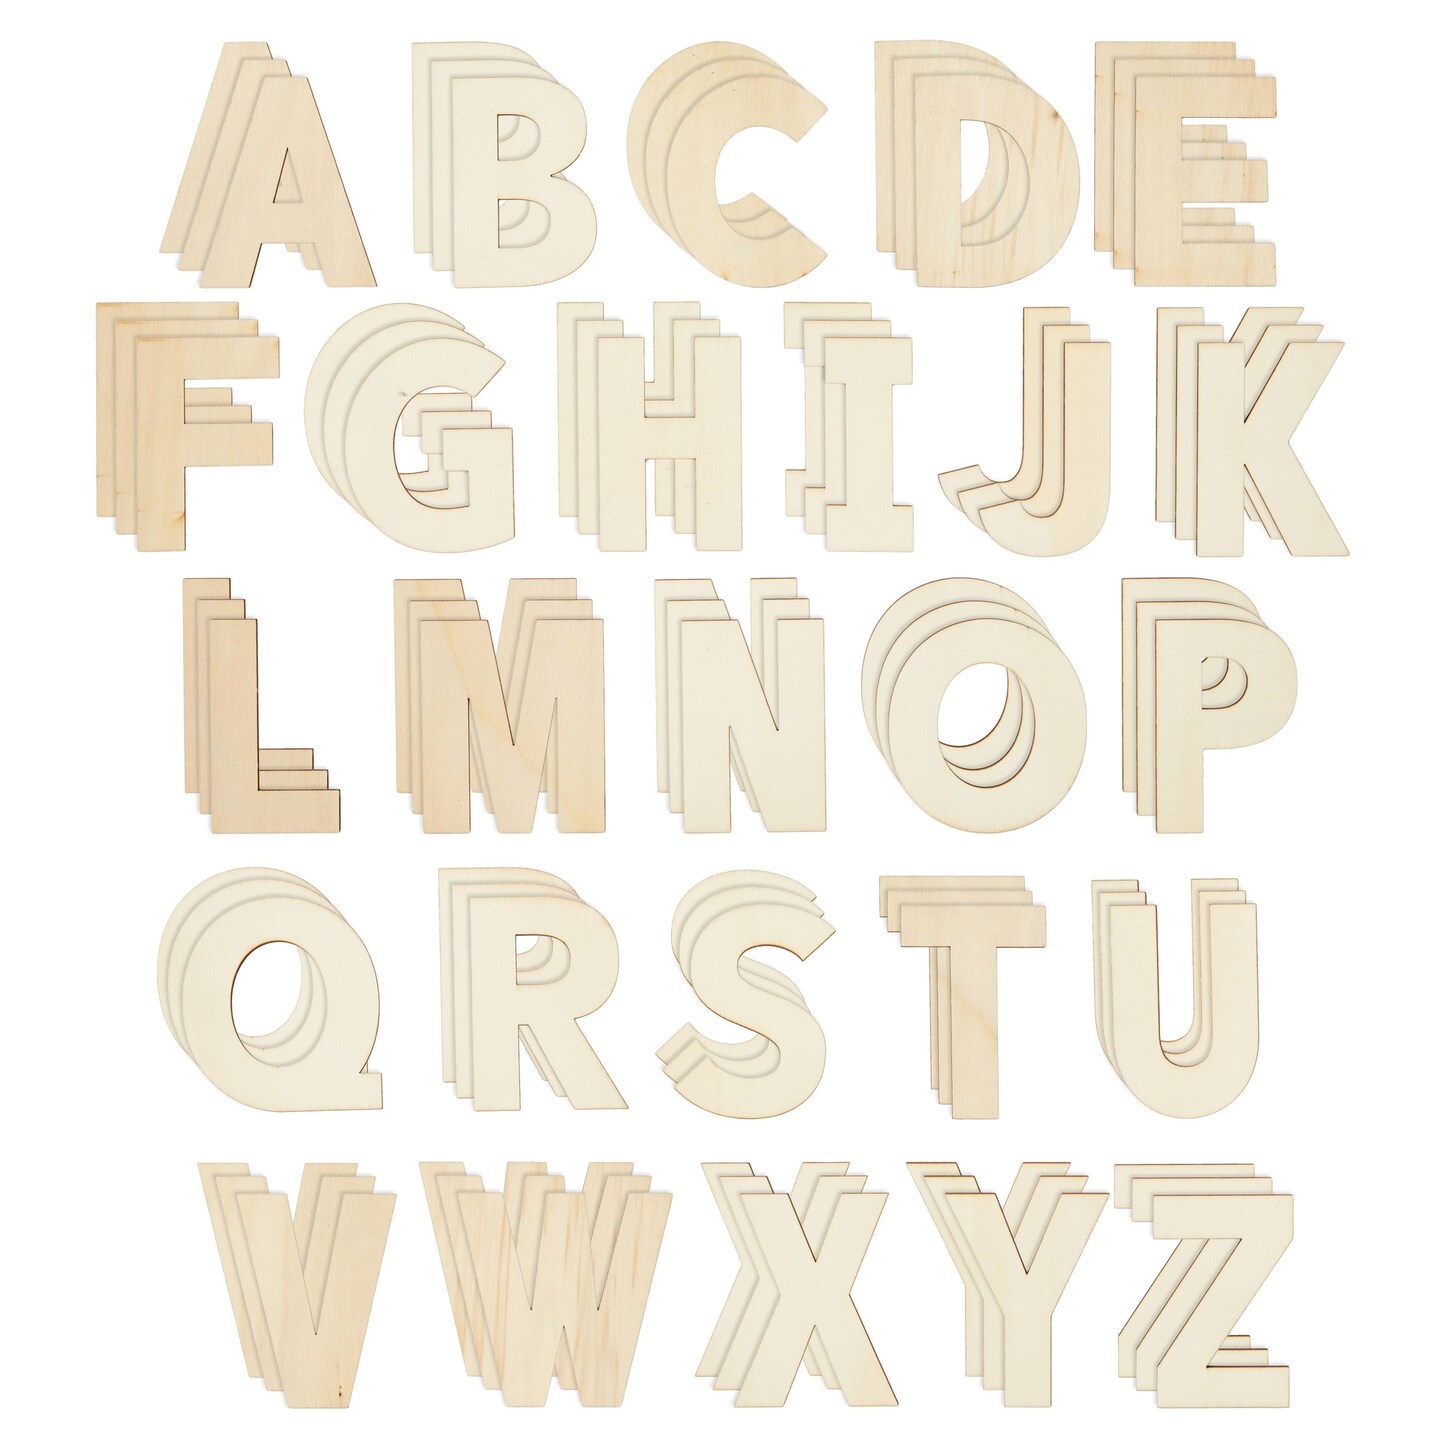 Wooden Letters - 3 1/2 tall solid Walnut Letters.